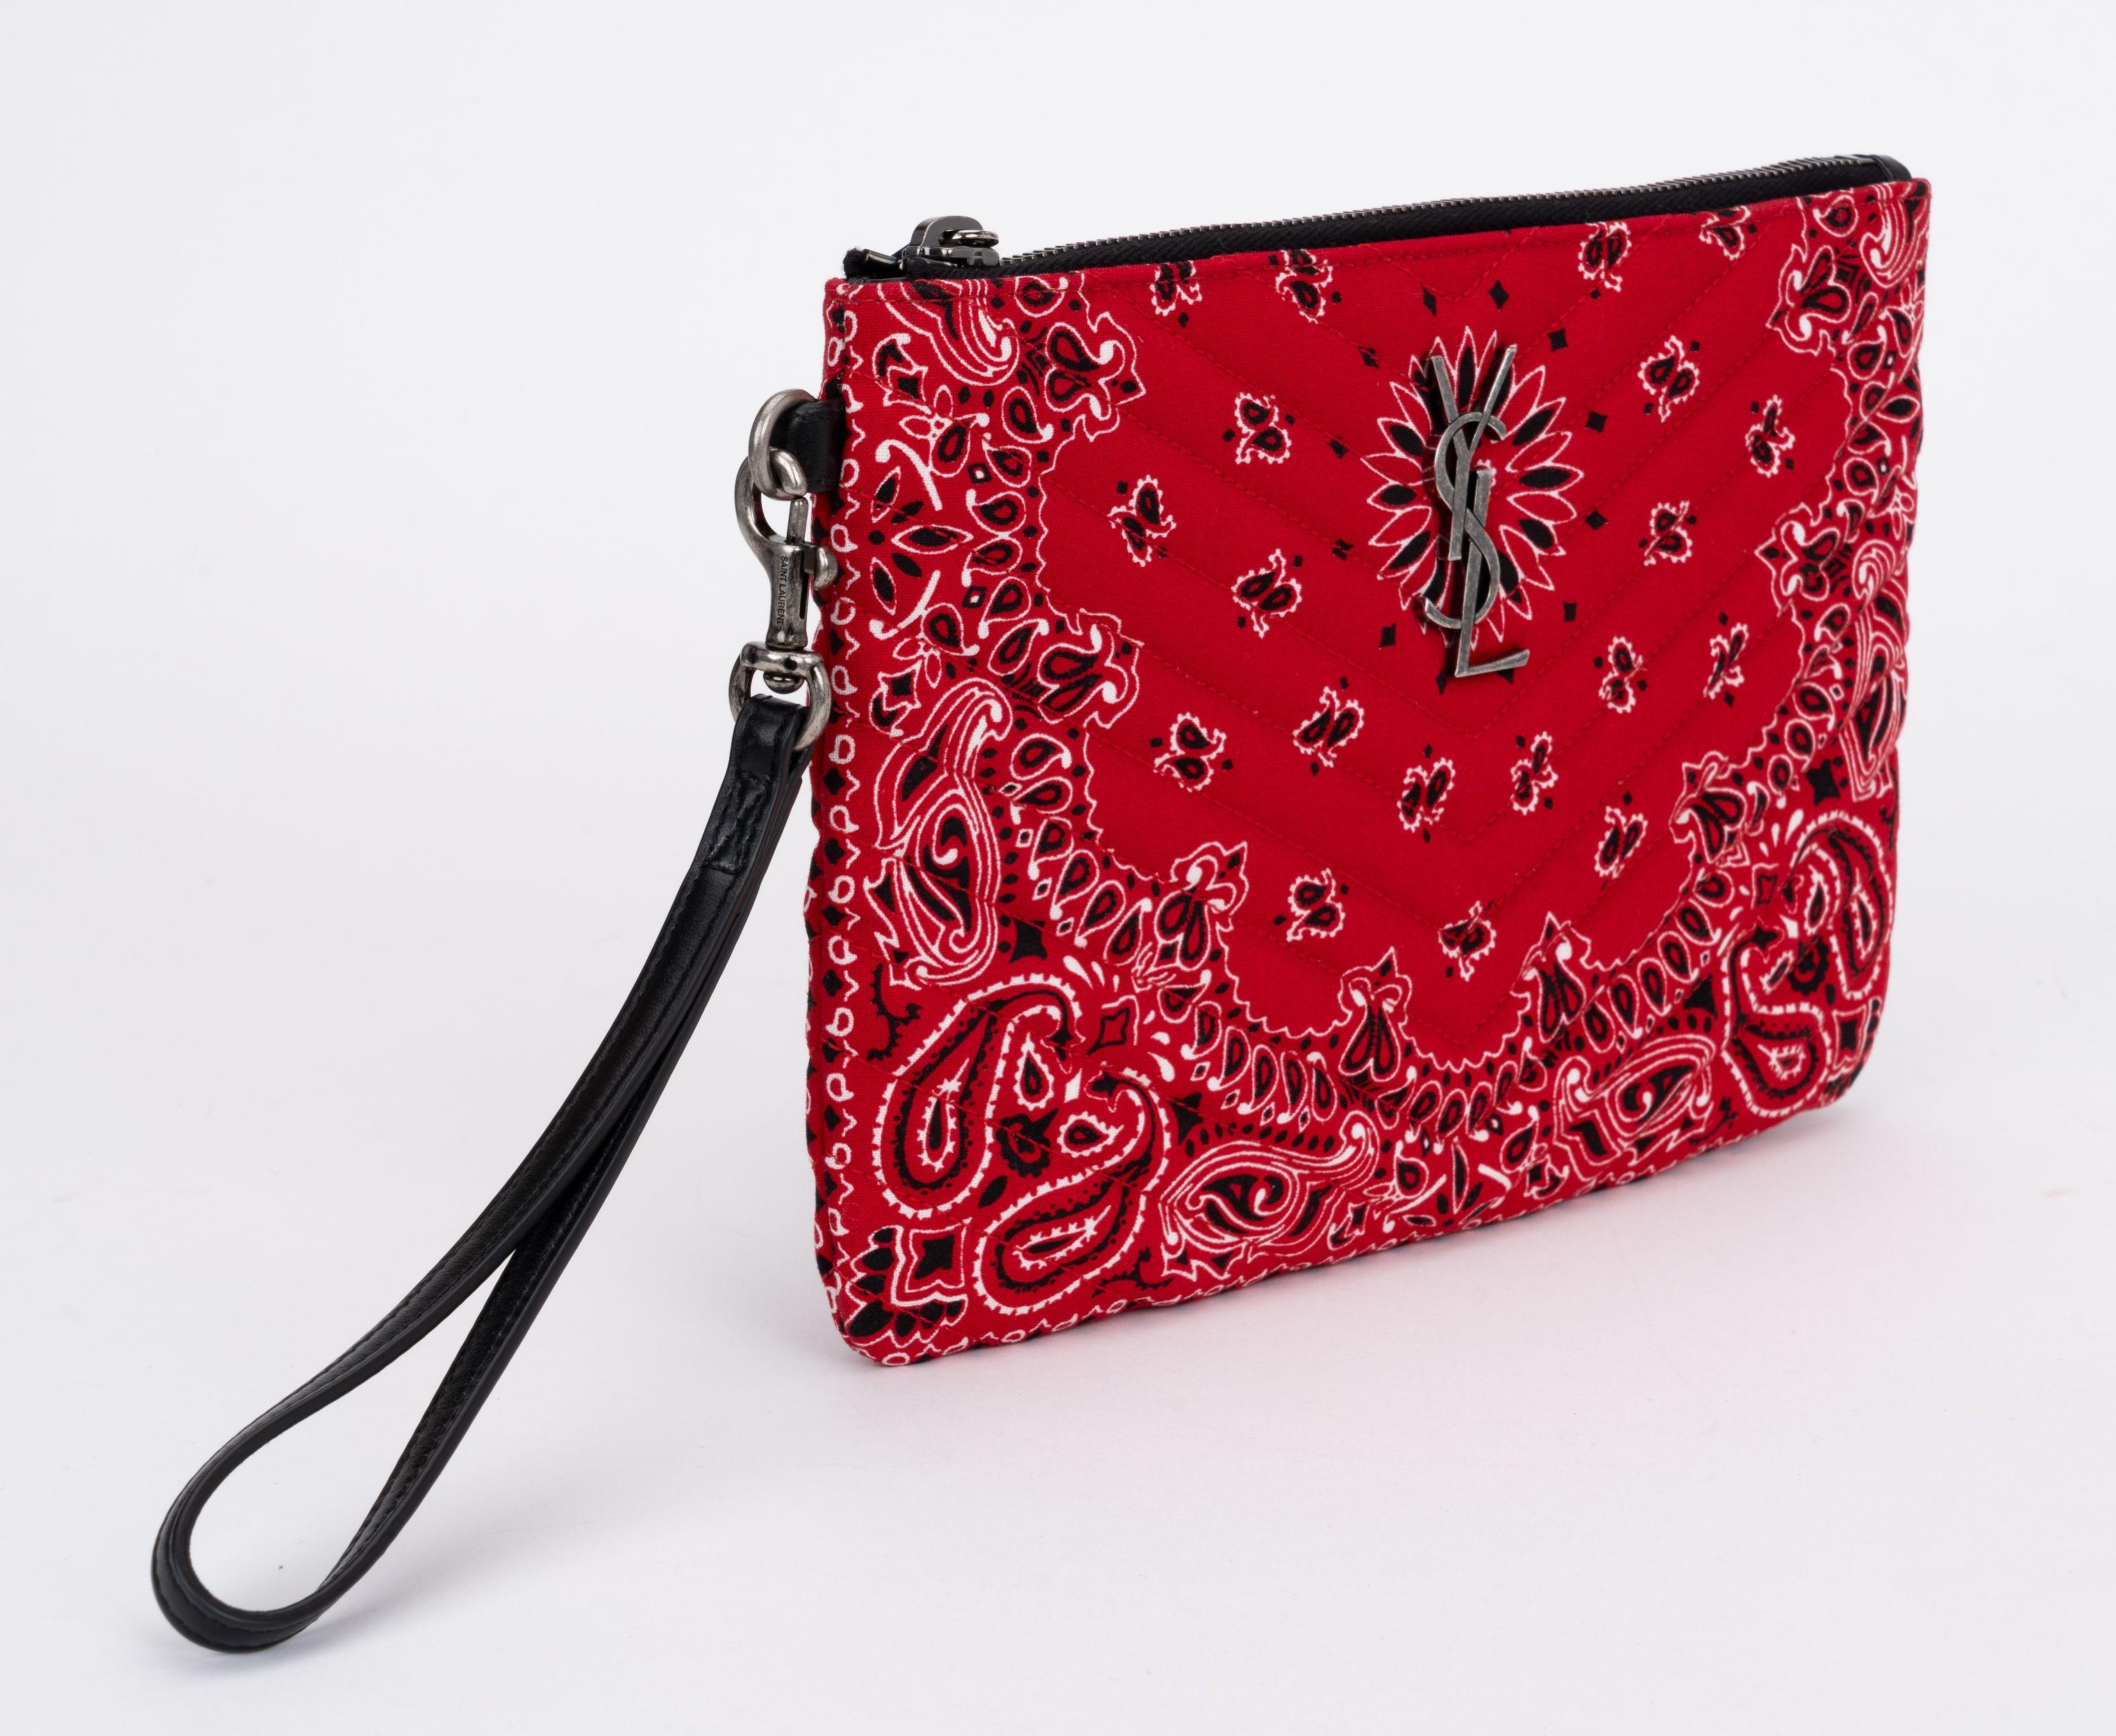 YSL brand new bandana pattern quilted in red, white and black. Black leather detachable wristlet handle, ruthenium hardware. Multiple credit card slots, comes with booklet and original dust cover.